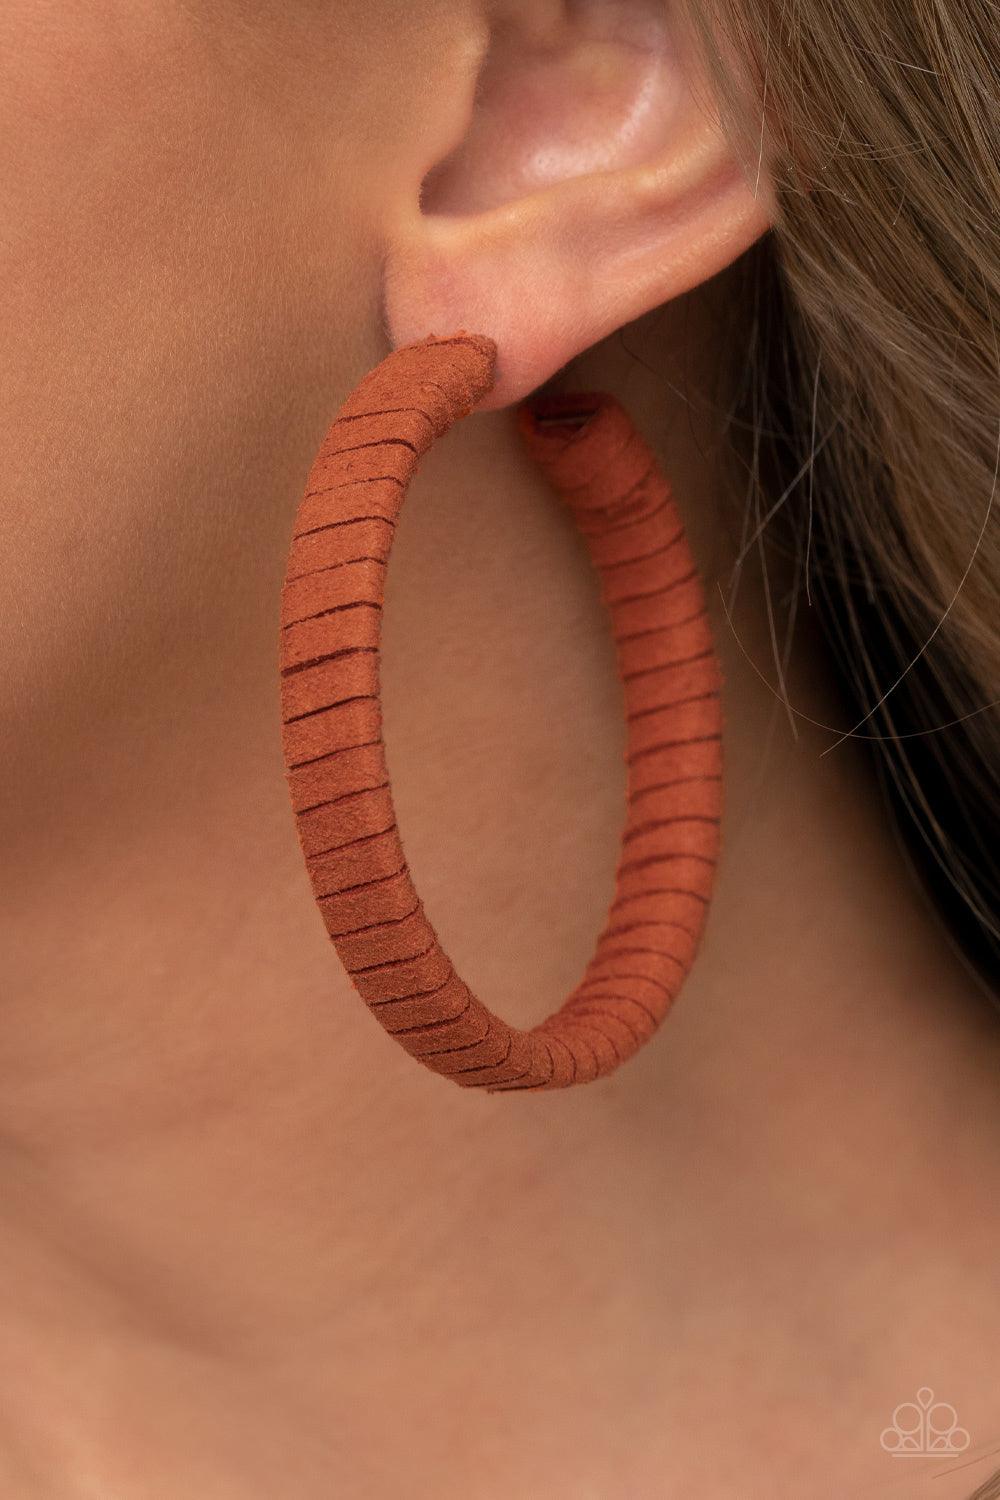 Paparazzi Accessories Suede Parade - Orange Orange suede cording wraps around an oversized hoop, creating an earthy pop of color. Earring attaches to a standard post fitting. Hoop measures approximately 2 1/4" in diameter. Sold as one pair of hoop earring